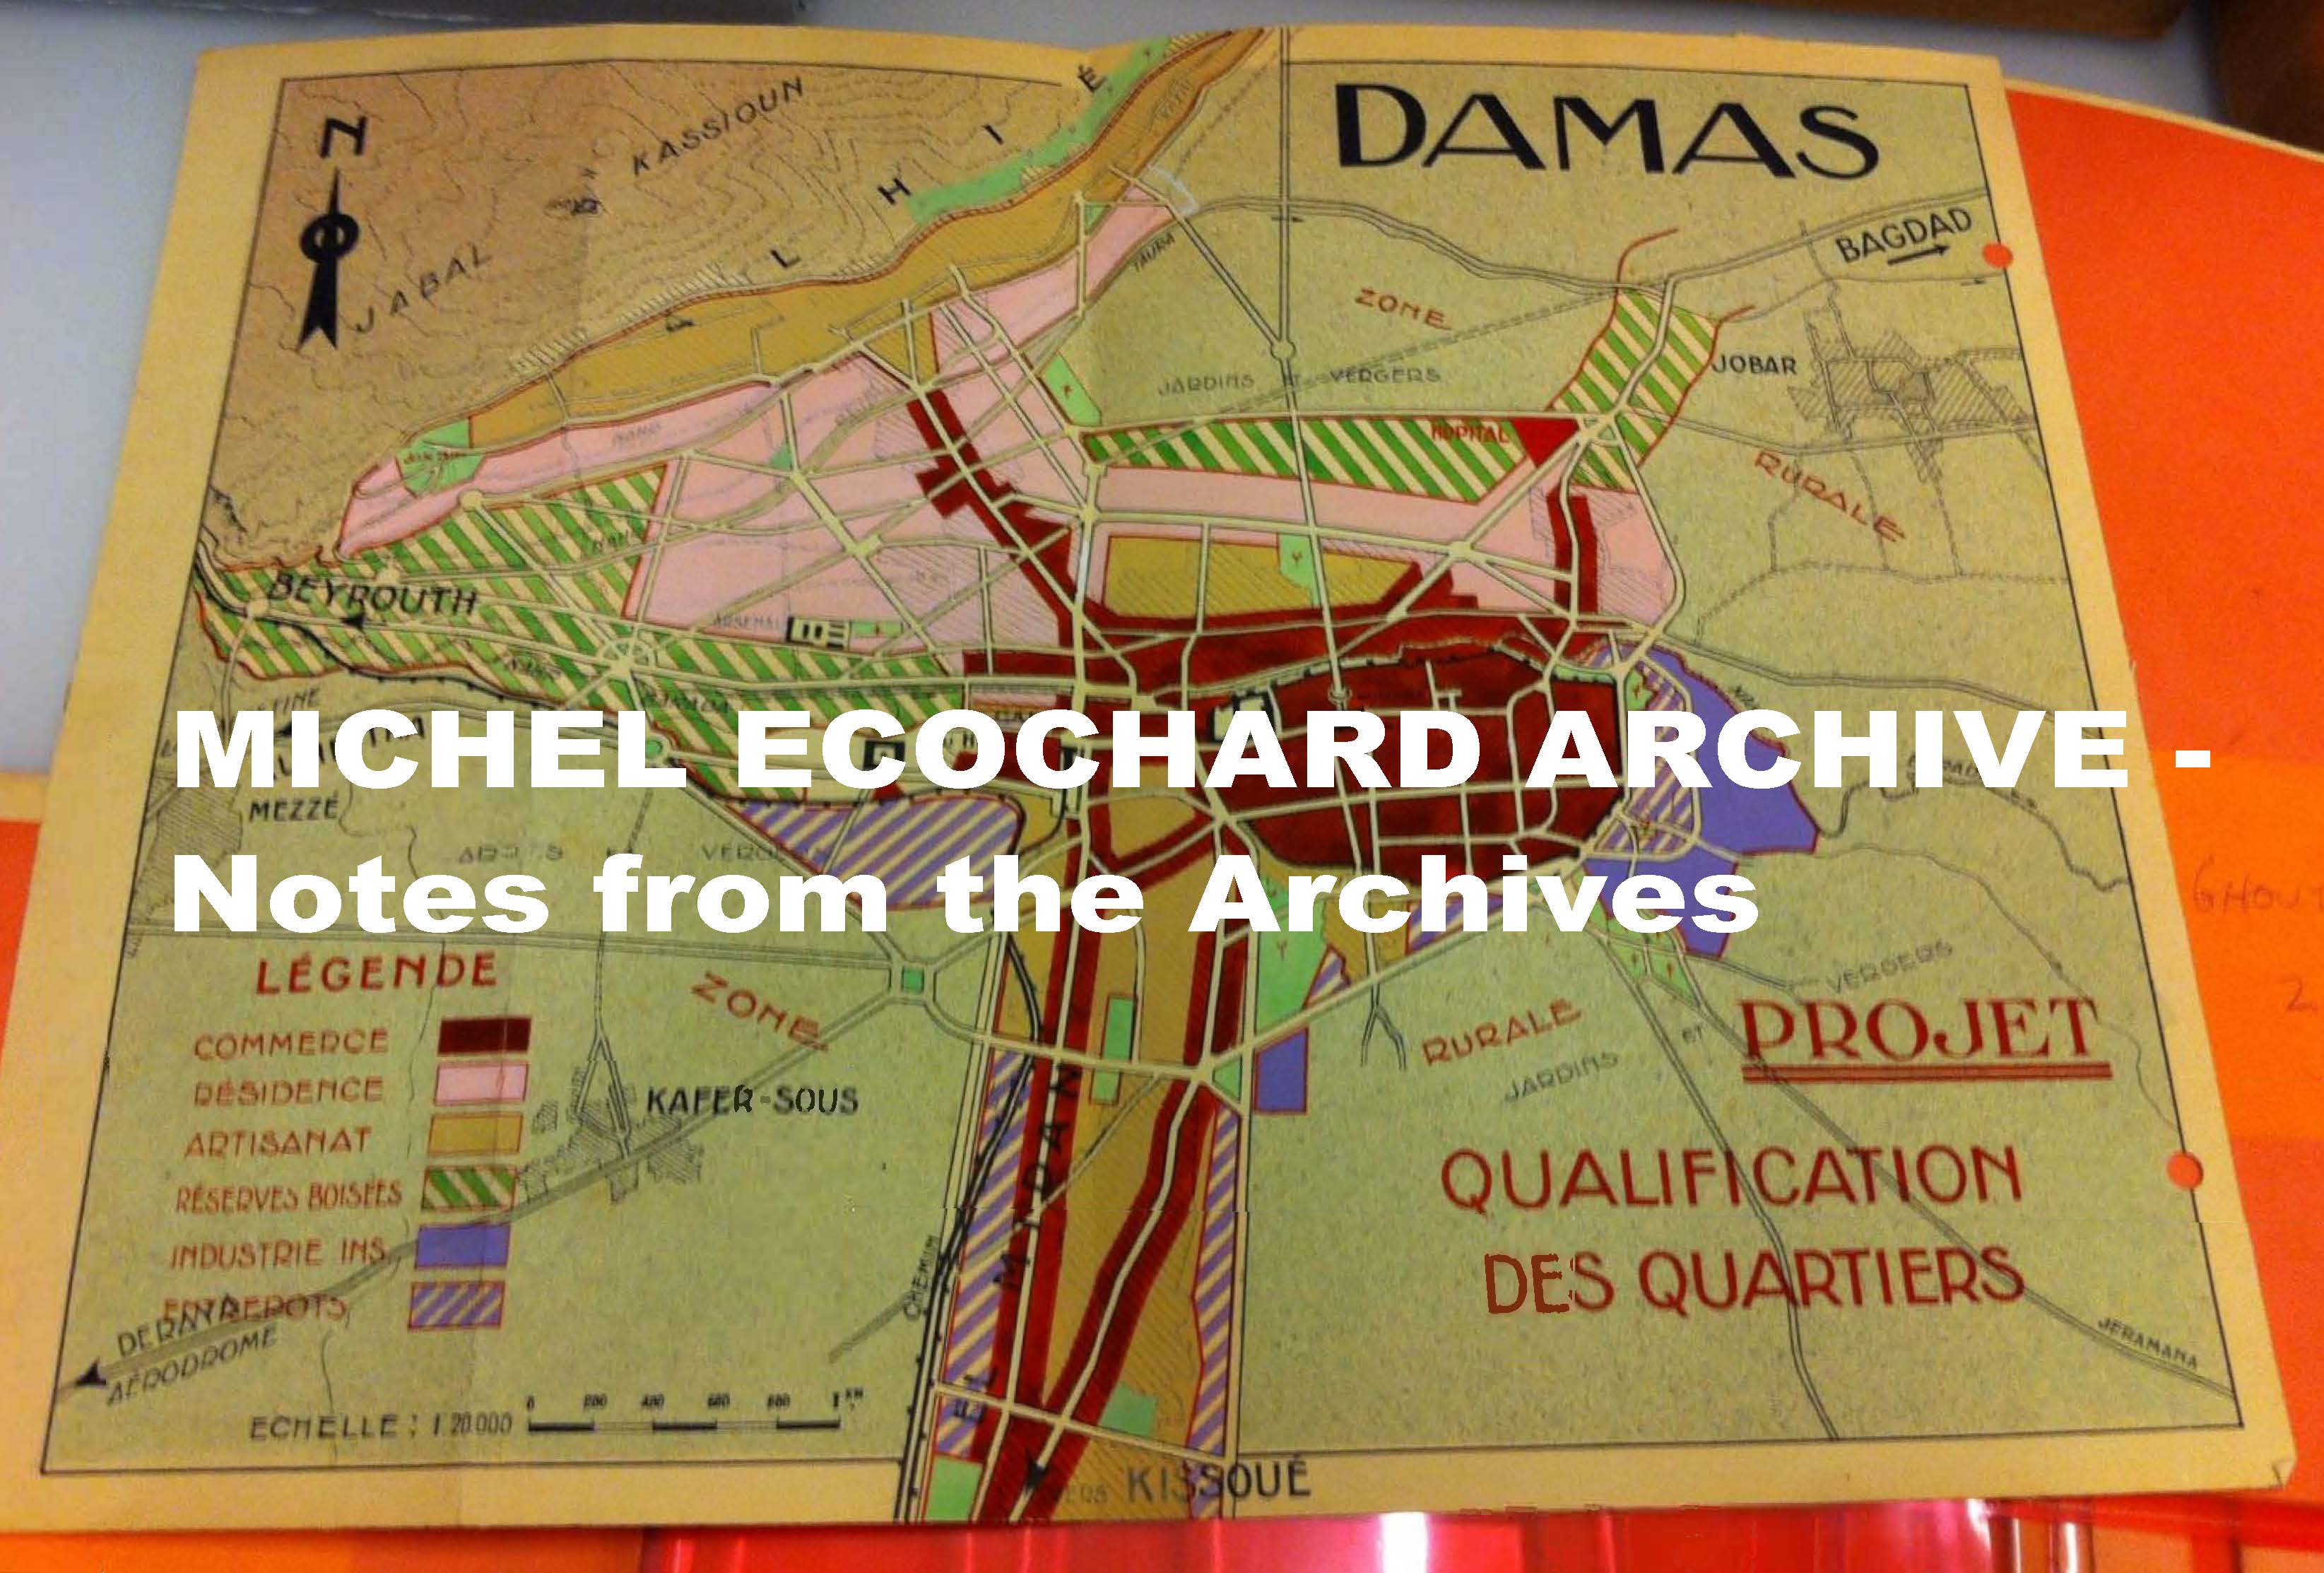 Michel Écochard Archive - Notes from the Archives